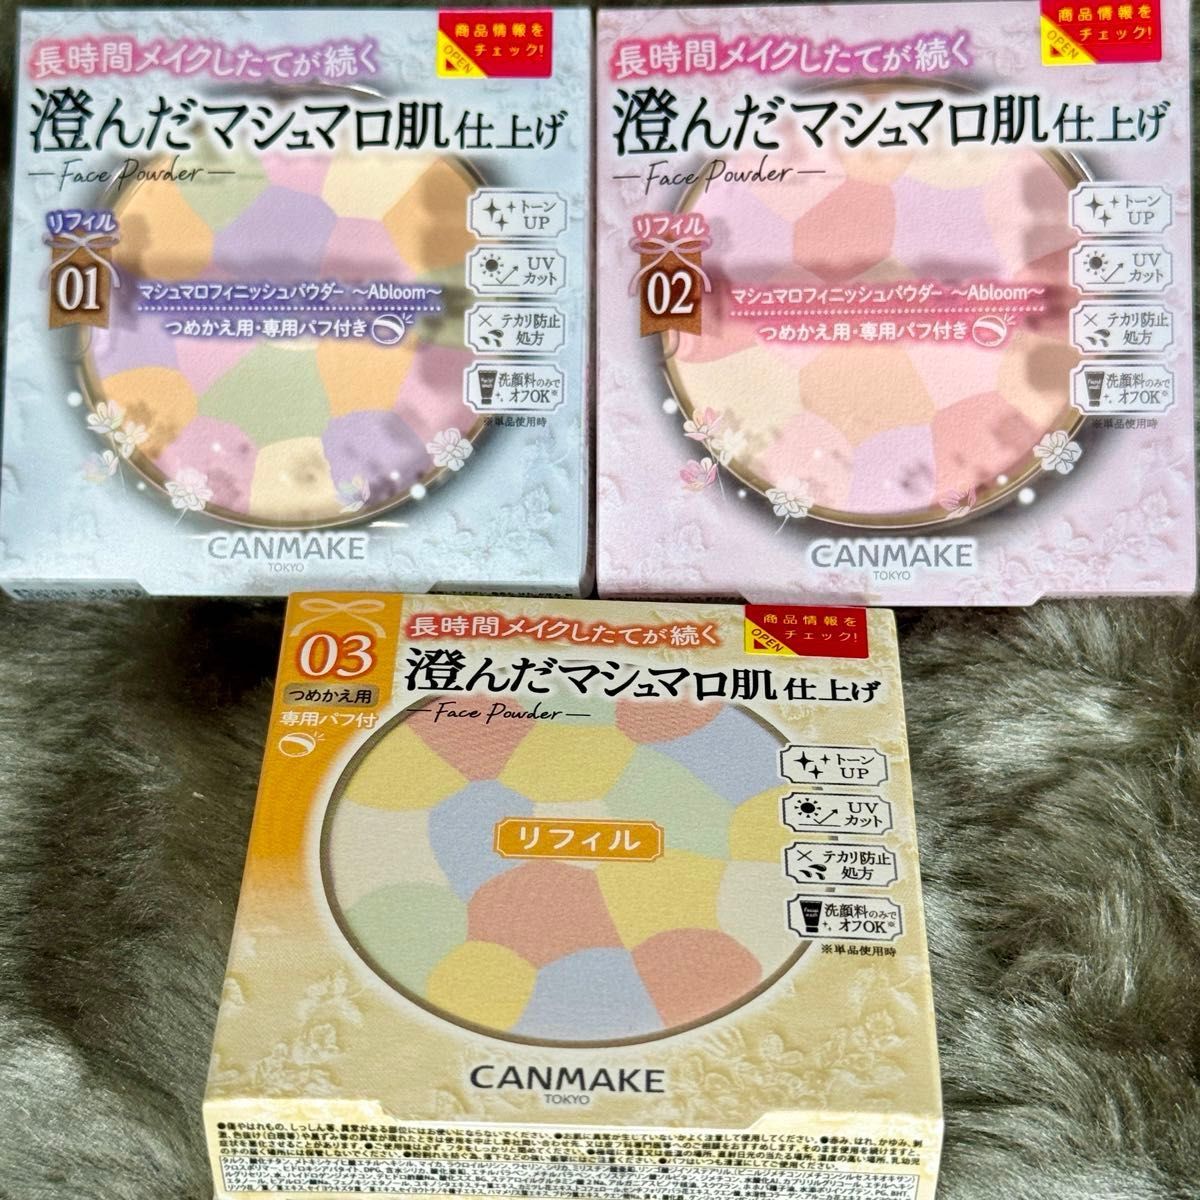 CANMAKE マシュマロフィニッシュパウダー abloom 01  or 02 サクラチュール  or 03 ×2点セット 新品